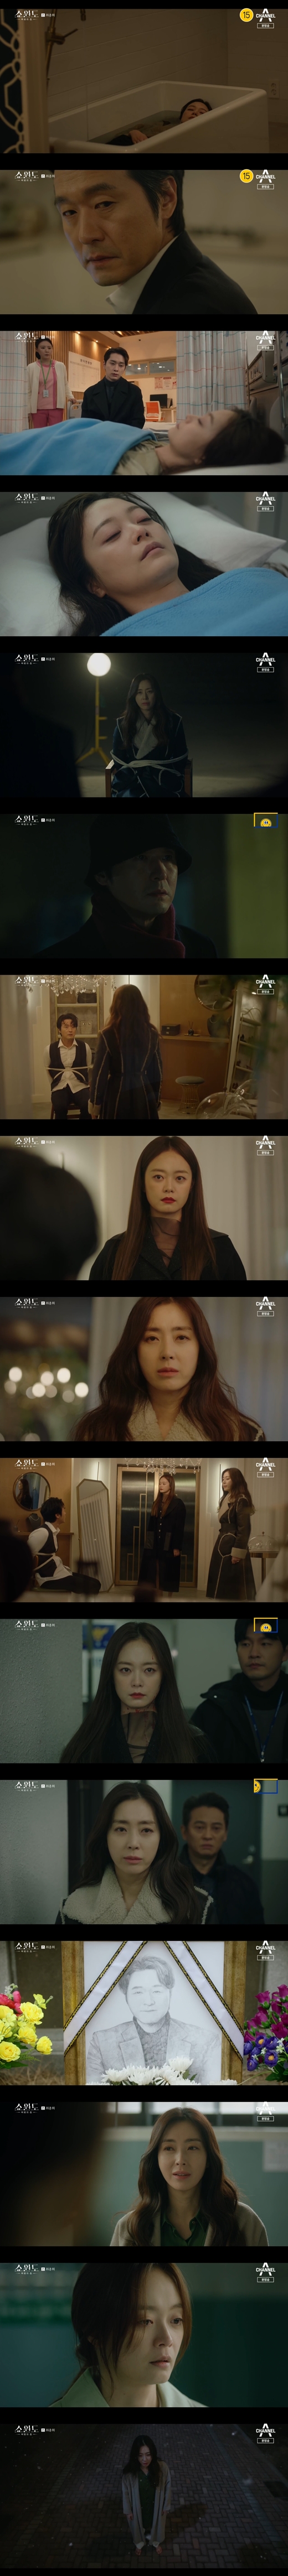 Lee Sung-jae died at the hands of Yoon Mi-ra.The last episode of Channel As monthly drama Showwindow: The Queens House (played by Han Bo-kyung, directed by Park Hye-young, directed by Kang Sol Park Dae-hee) was broadcast on the 18th.Yoon Mi-ra tried to end everything by dying with Shin Myung-seop (Lee Sung-jae), but he was overpowered by Shin Myung-seops power.After losing the lighter to Shin Myung-seop, Yoon Mi-ra lost consciousness, and Shin Myung-seop, who laid him in the bathtub where the water was rising, made the situation as if he had made an extreme choice.It was Han Jeong-won (Hwang Chan-sung), who arrived just in time to save Yun Mi-ra.On the other hand, Han Sun-joo (Song Yoon-ah), who visited the place after hearing that Shin Myung-seop was trying to hand over the Rahen painting, was caught by Shin Myung-seops master.Shin Myung-seop, who visited the scene after hearing this news, was a reverse trap that Han Seon-ju had dug up. The gunman was bought by Han Seon-ju, and Shin Myung-seop was caught by Han Seon-ju.Shin Myung-seop, who opened his eyes, was only waiting for punishment, because Han Sun-ju and Yoon Mi-ra appeared together in front of Shin Myung-seop, who only made excuses until the end.Yoon Mi-ra was arrested, and the two crossed in the corridor of the police station.After a while, Han Sun-joo, who visited Yoon Mi-ra in prison, said, I regret all the moments I loved Shin Myung-seop. Han Sun-joo said, I live and be punished.And now you live your life properly. Then, with the help of Cha Young-hoon (Kim Seung-soo), I supported Yoon Mi-ra in a favorable direction.Four years later, Yoon Mi-ra and Han Sun-ju, who regained their smiles again, reunited. Yoon Mi-ra apologized, saying, I have never said anything.Meanwhile, Showwindow: The Queens House has been drawing the story of a woman who did not know she was her husbands woman and cheered for an affair.Actors Song Yoon-ah, Lee Sung-jae, Jeon So-min, and Hwang Chan-sung have been well received and have written a new history of Channel A ratings.